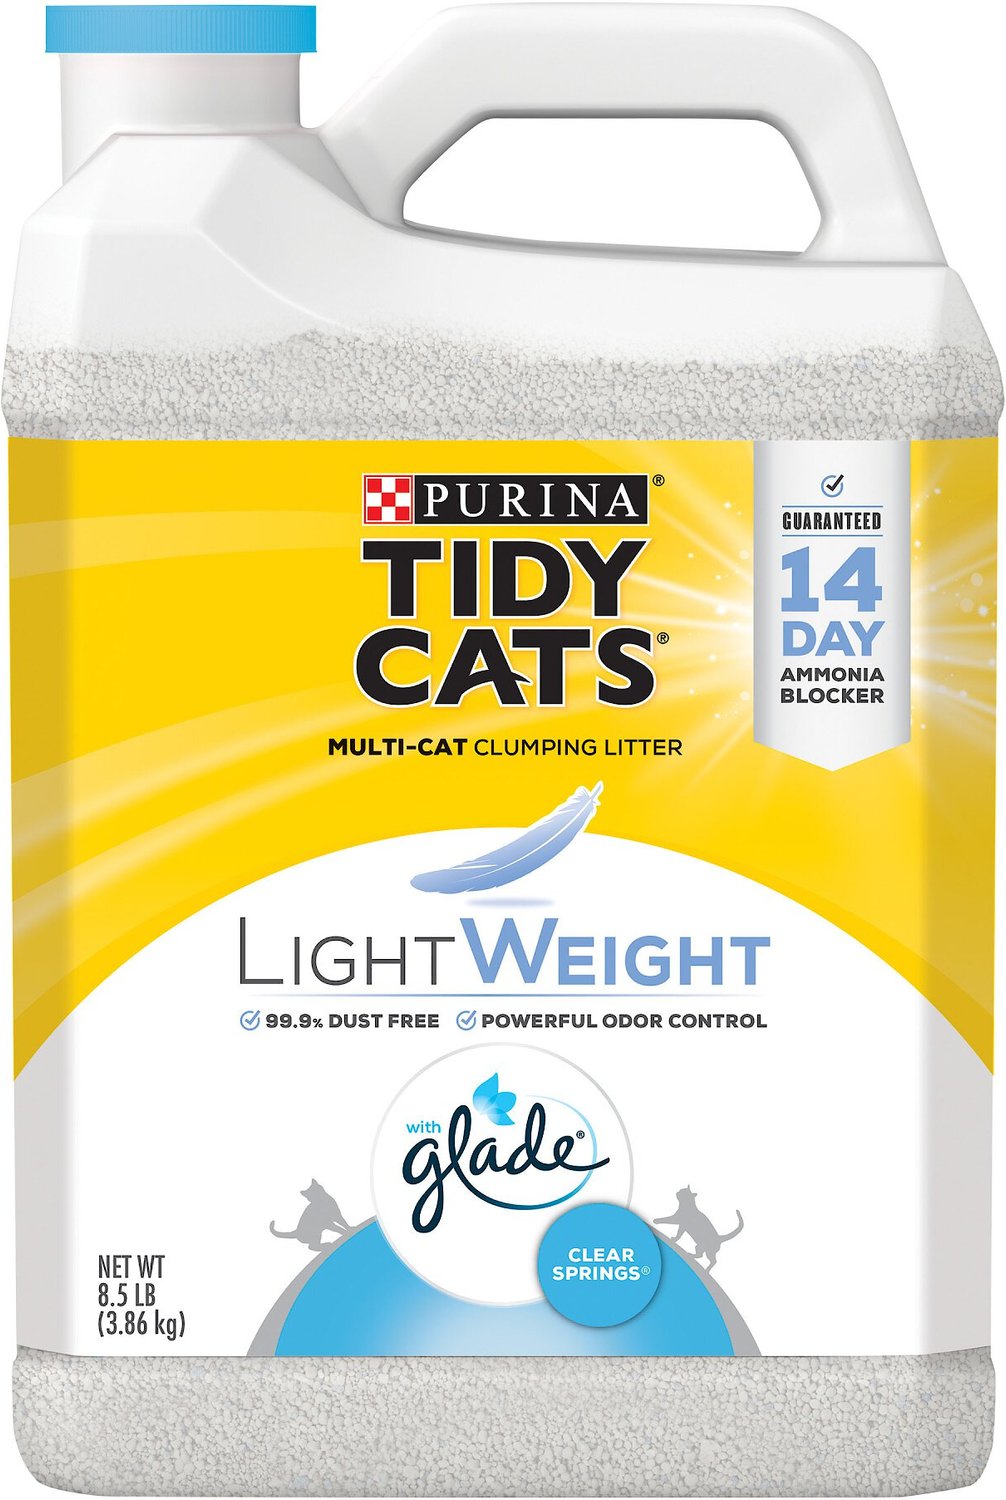 Tidy Cats LightWeight Glade Tough Odor Solutions Clear Springs Scent